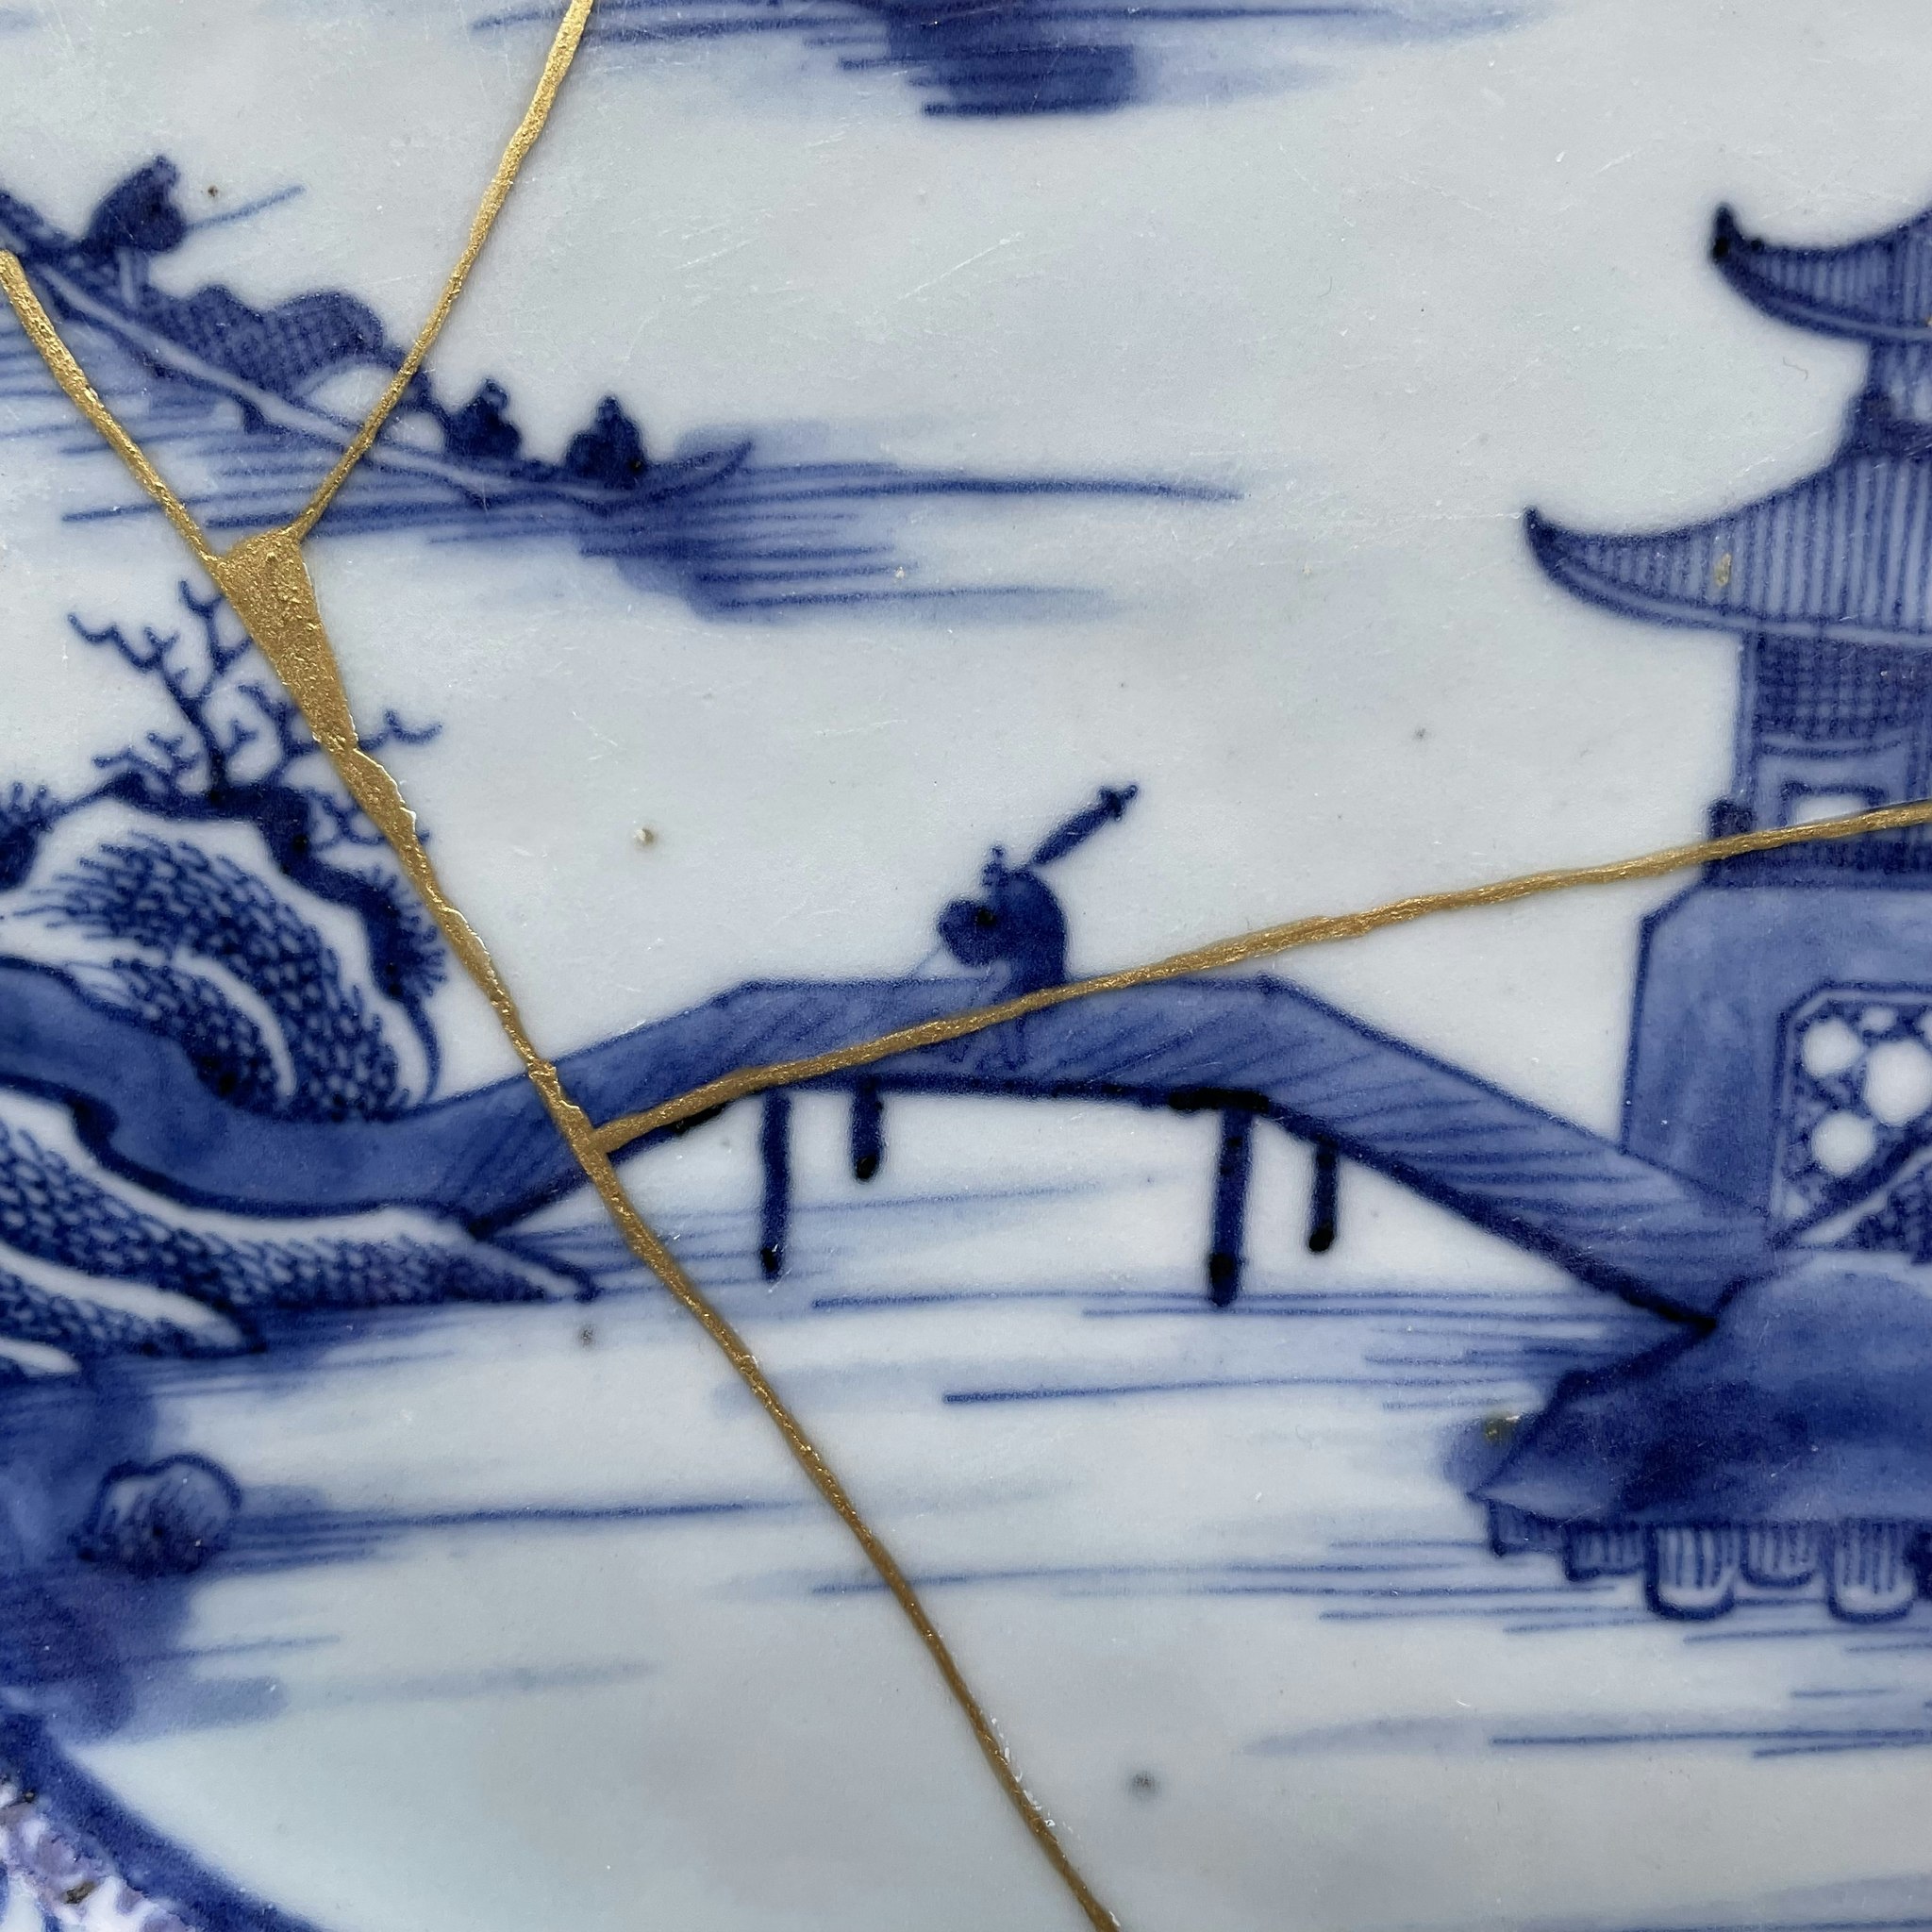 Antique Chinese Export Blue and White Porcelain platter, Qianlong period #1235